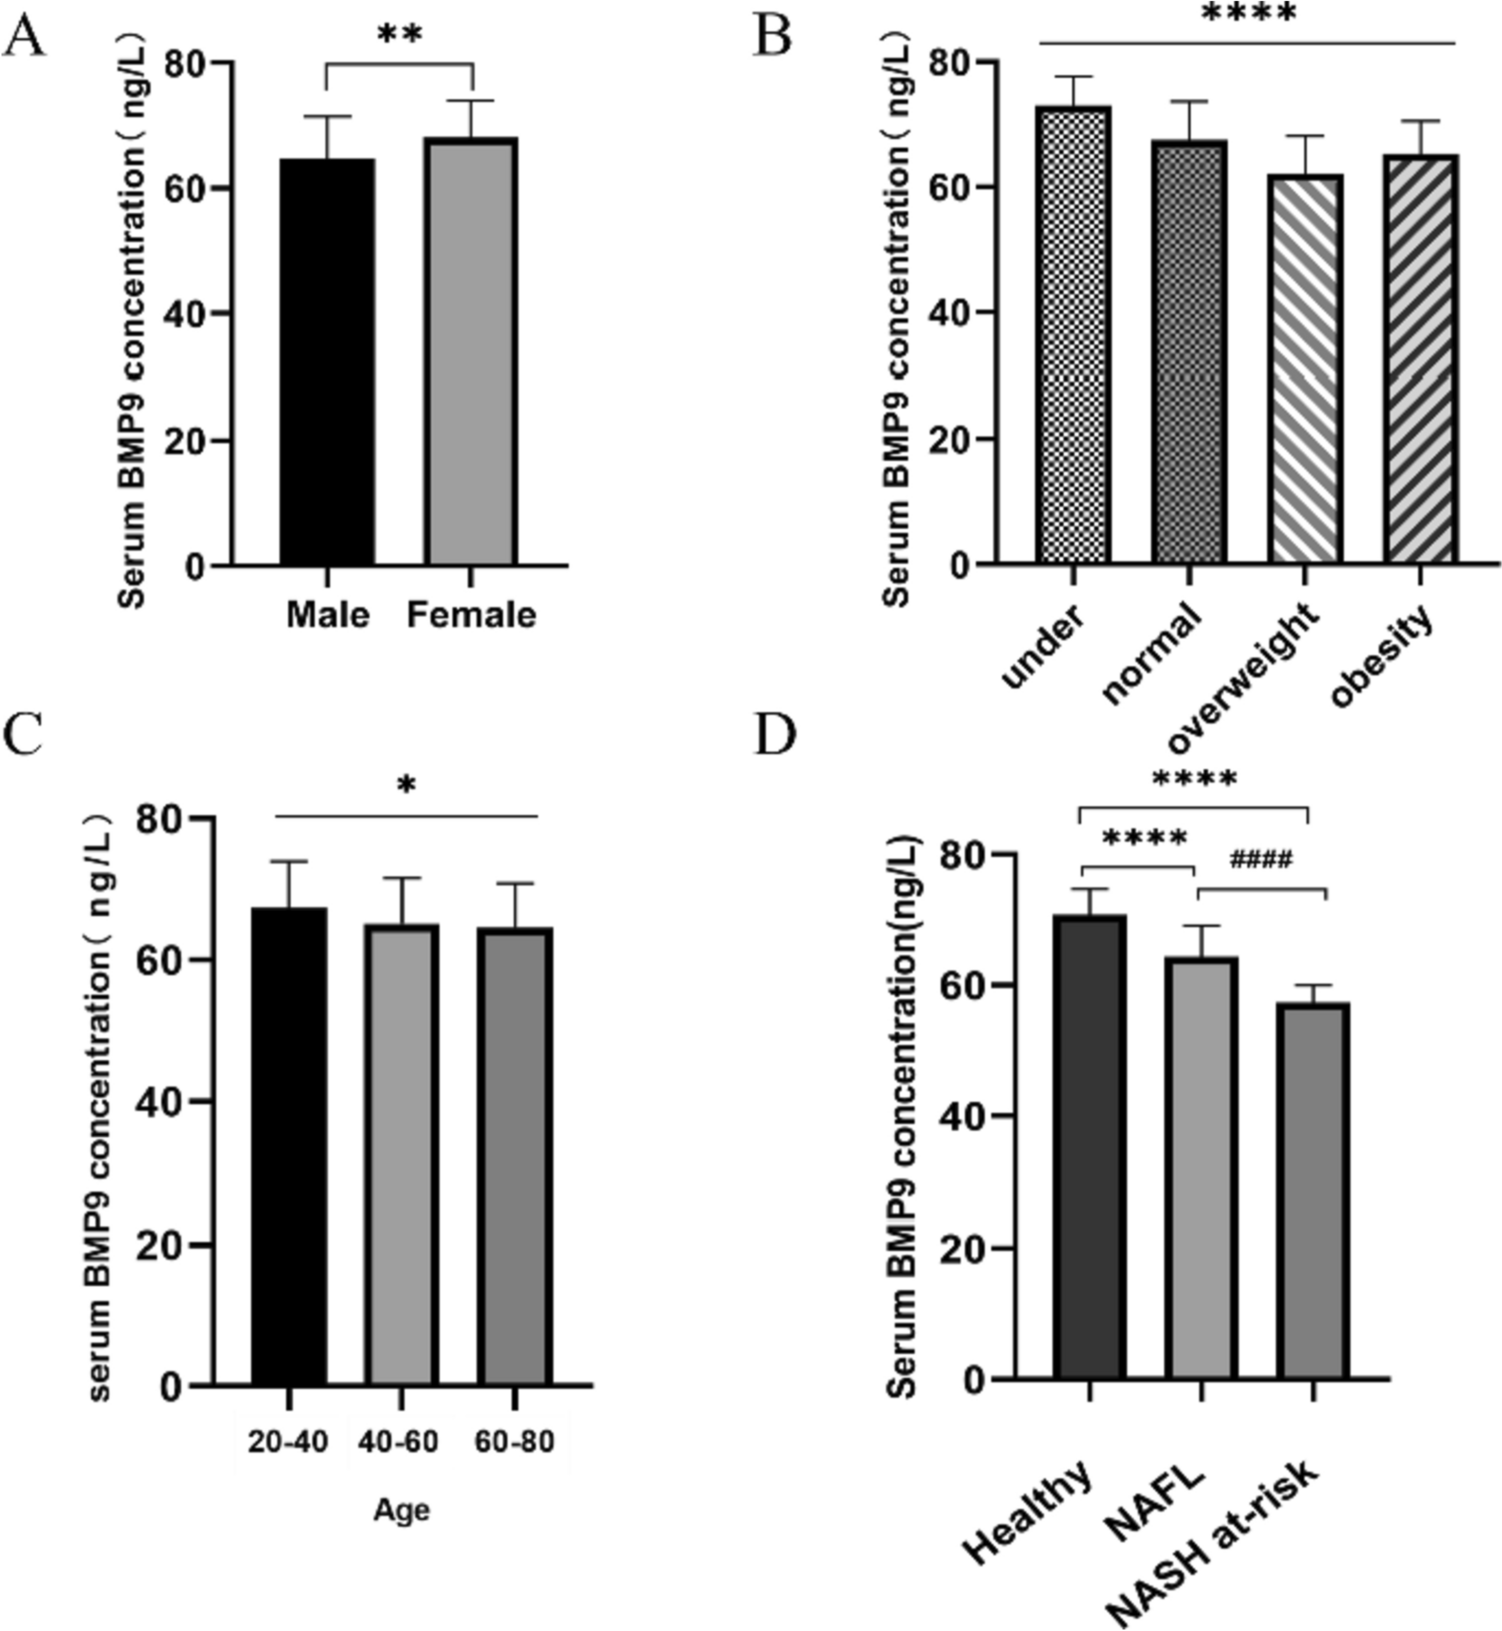 Circulating Bone morphogenetic protein 9 (BMP9) as a new biomarker for noninvasive stratification of nonalcoholic fatty liver disease and metabolic syndrome